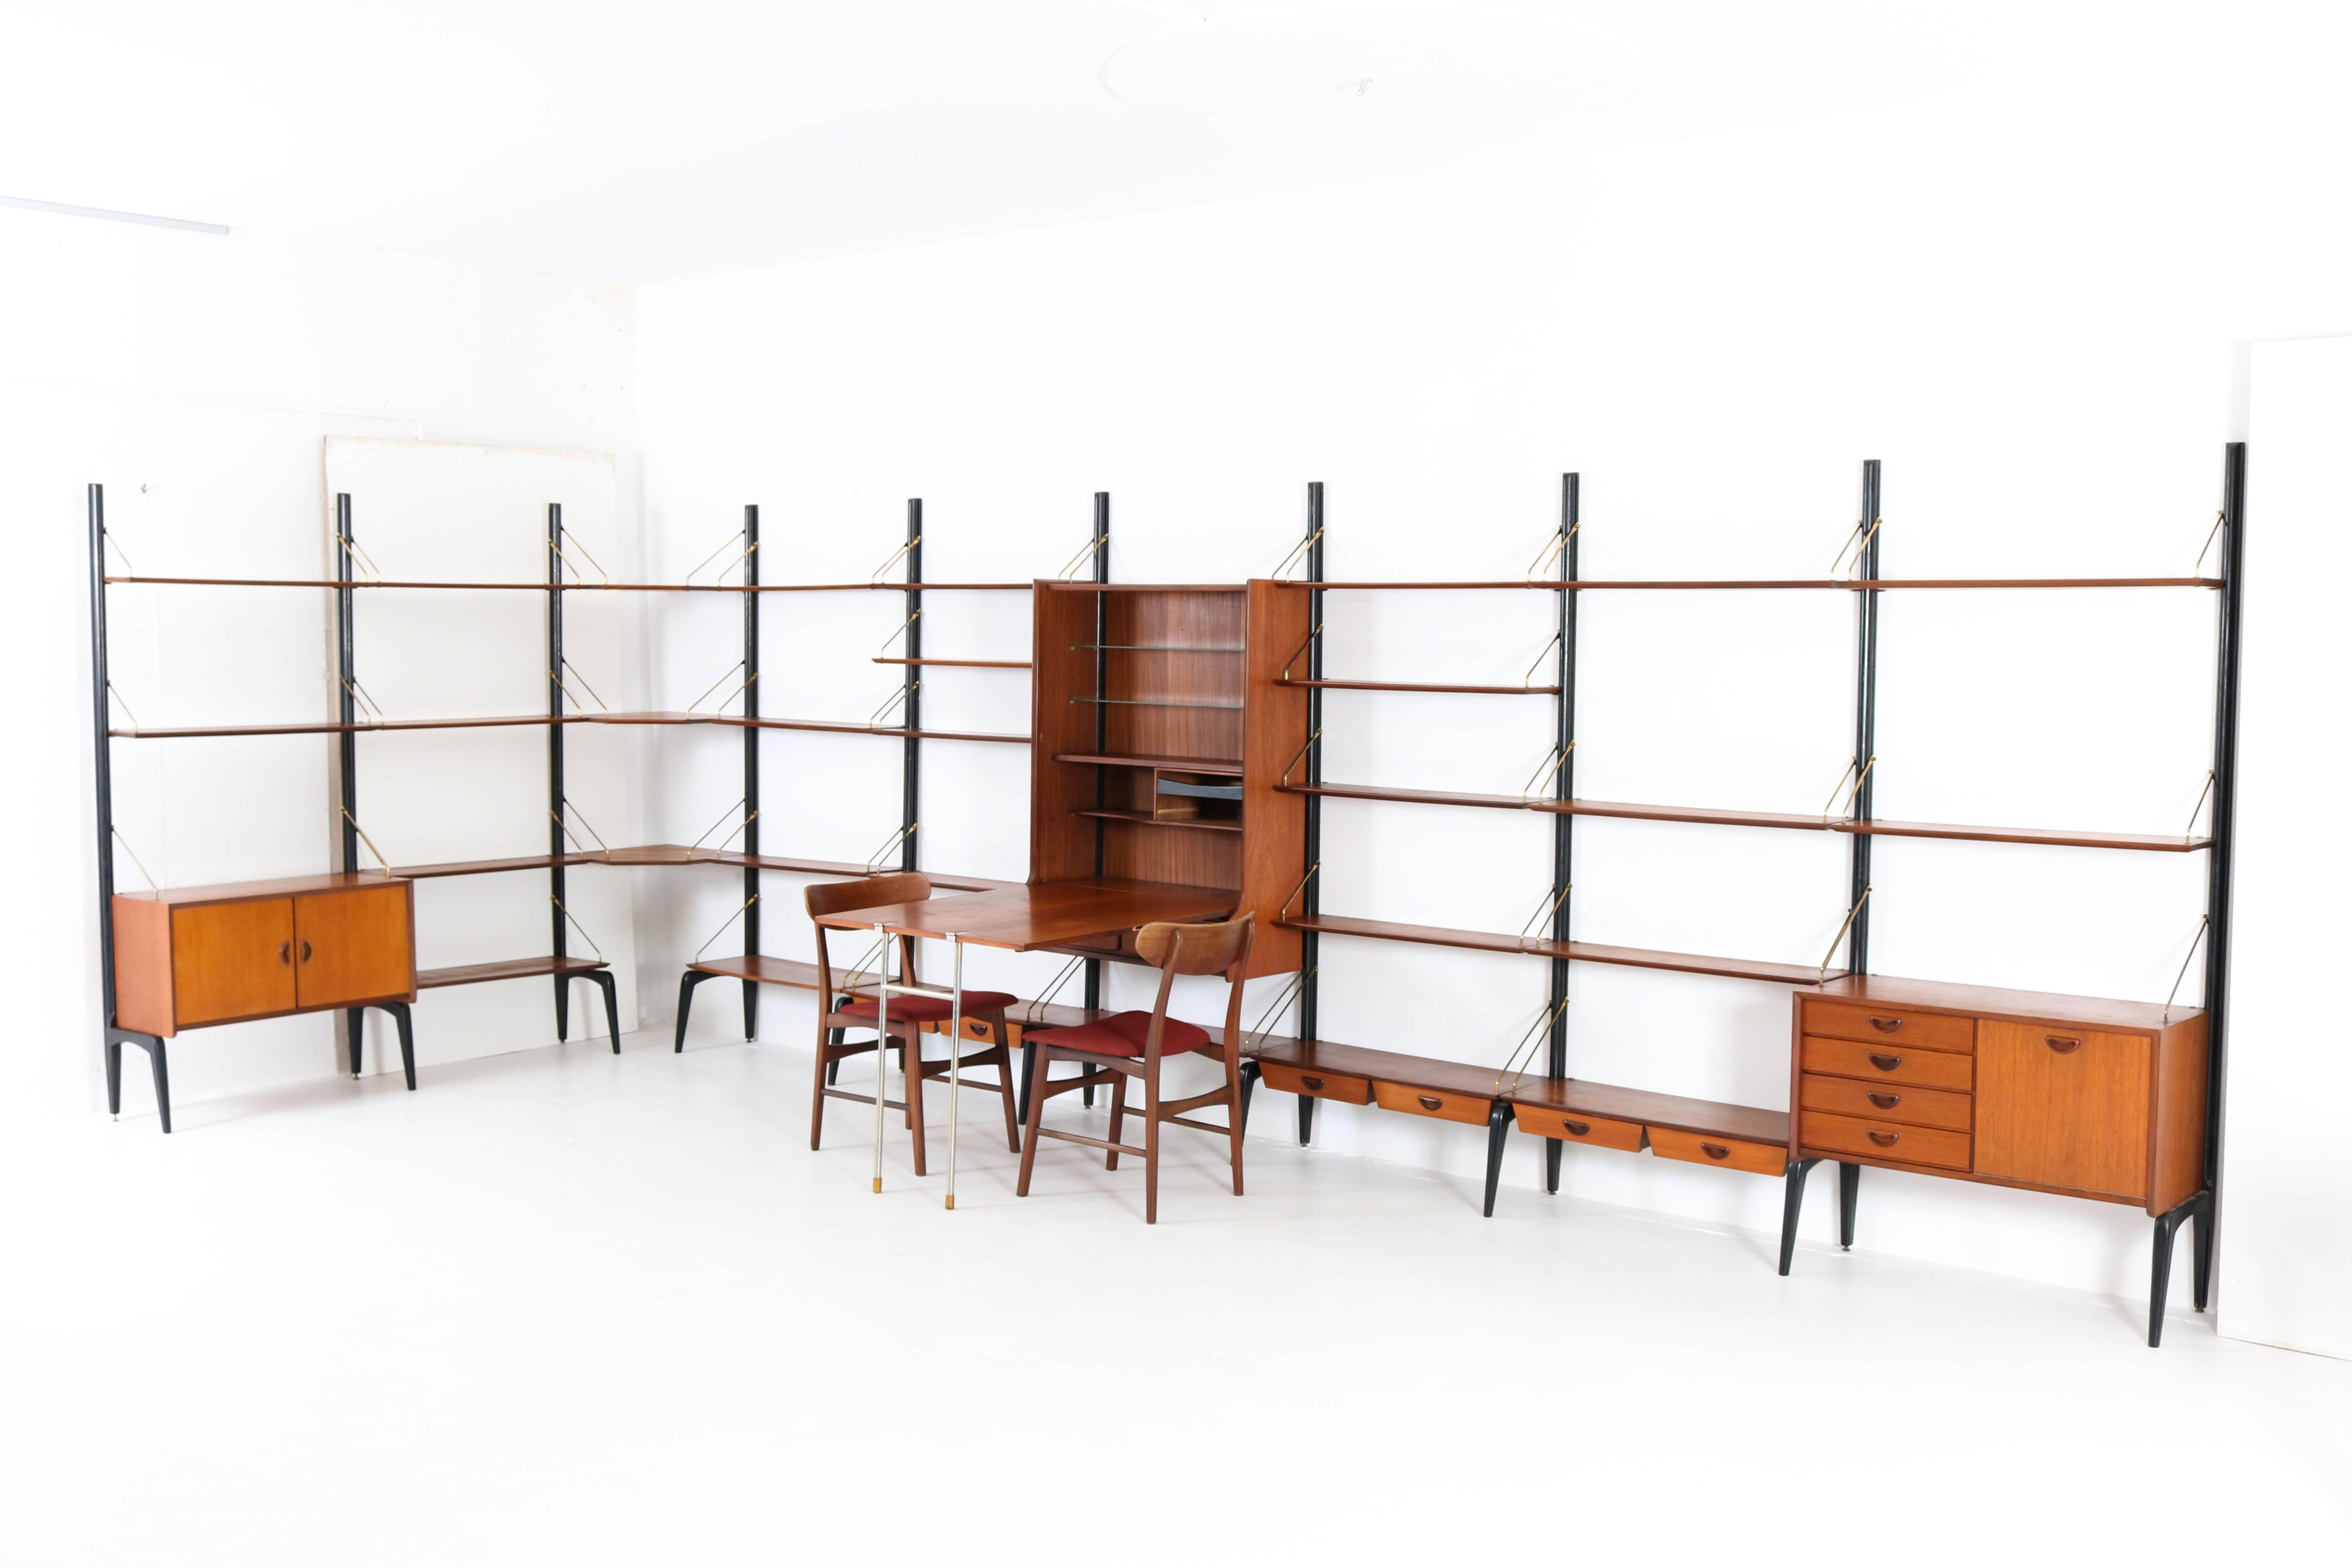 Impressive and very rare Mid-Century Modern extra-large freestanding wall unit by Louis Van Teeffelen for Webe, 1950s.
Original black lacquered wood, teak veneer and brass support rods with signs of wear and age.
This shelving system